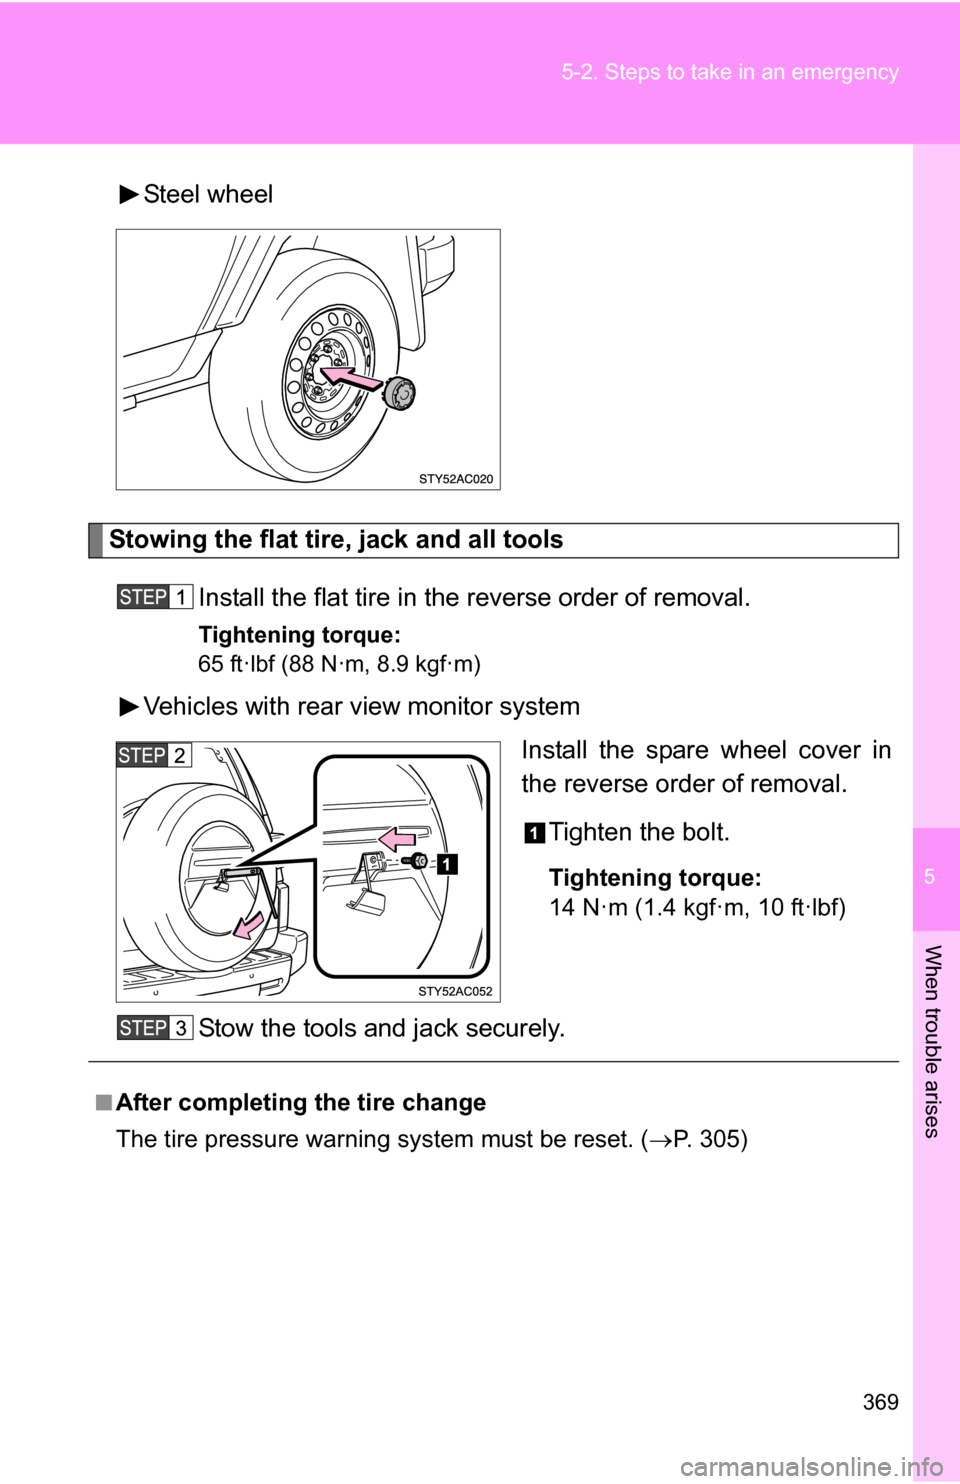 TOYOTA FJ CRUISER 2009 1.G Owners Manual 5
When trouble arises
369
5-2. Steps to take in an emergency
Steel wheel
Stowing the flat tire, jack and all tools
Install the flat tire in the reverse order of removal.
Tightening torque:
65 ft·lbf 